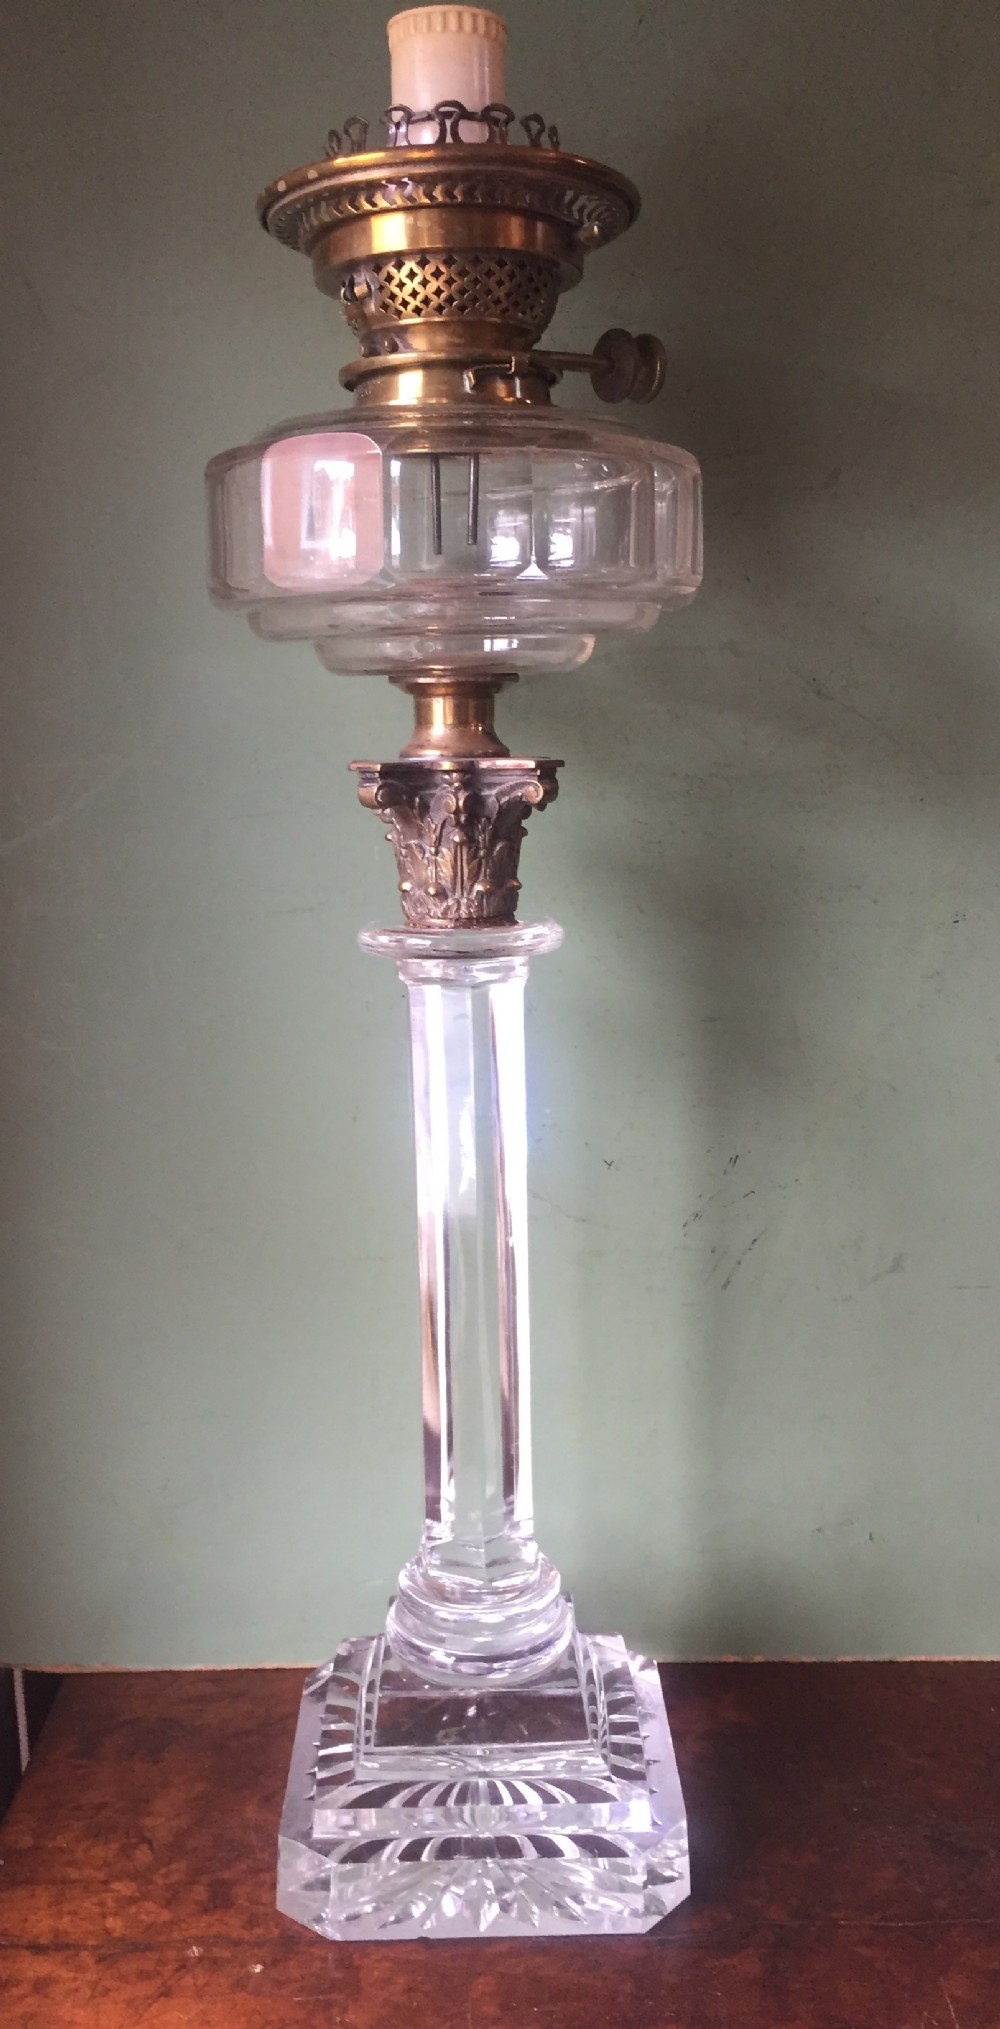 late c19th cutglass column oillamp by hinks with corinthian capital cast brass top now converted to electricity